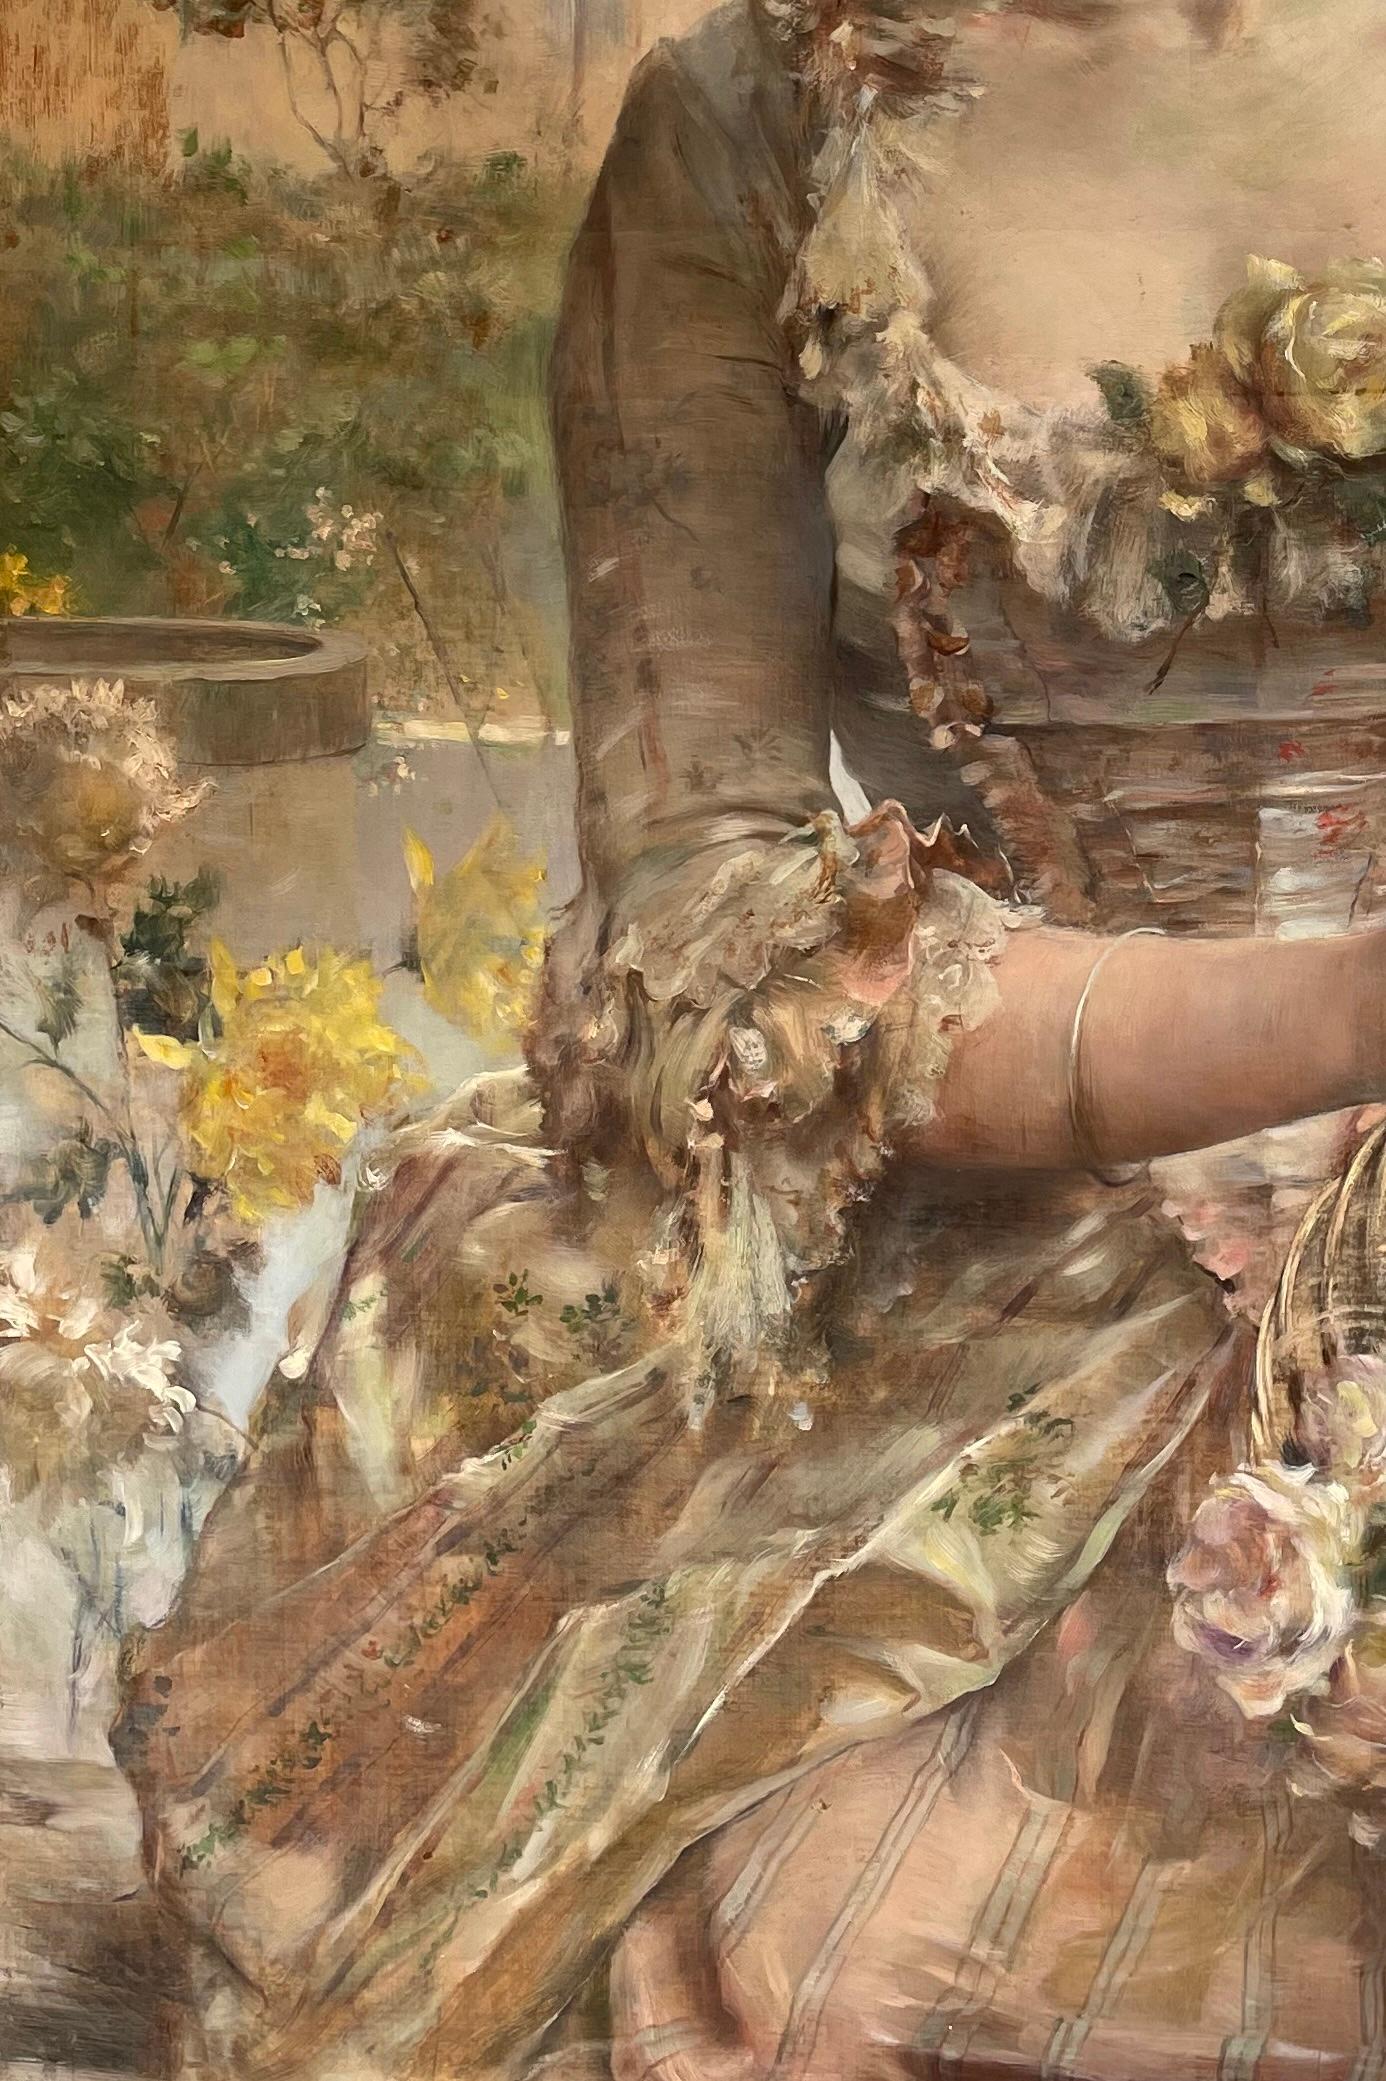 FLOWER GIRL by E. Giachi dress & flowers in Italian town landscape LARGE 19th c For Sale 5